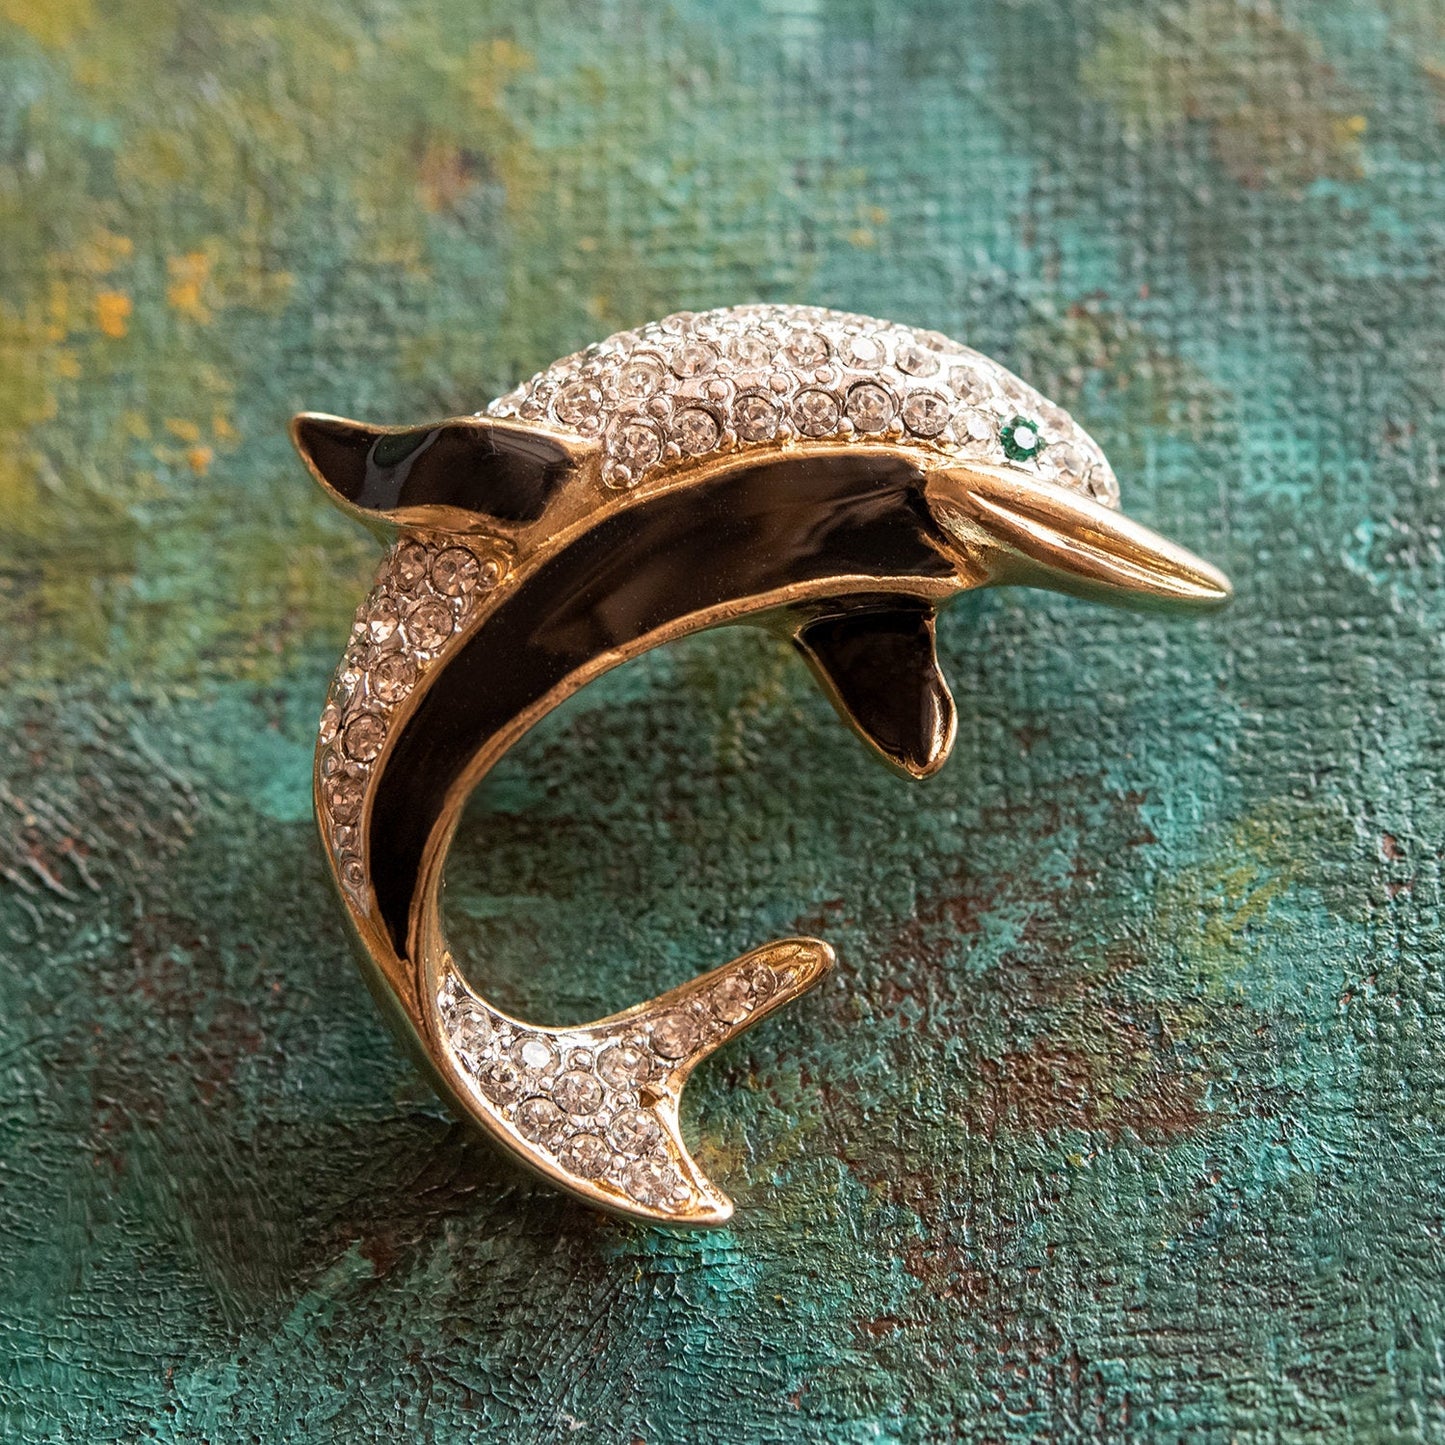 Vintage Ring Dolphin Pin Hand Painted and Clear Swarovski Crystals Emerald Crystal Eye 18k Gold Size: undefined